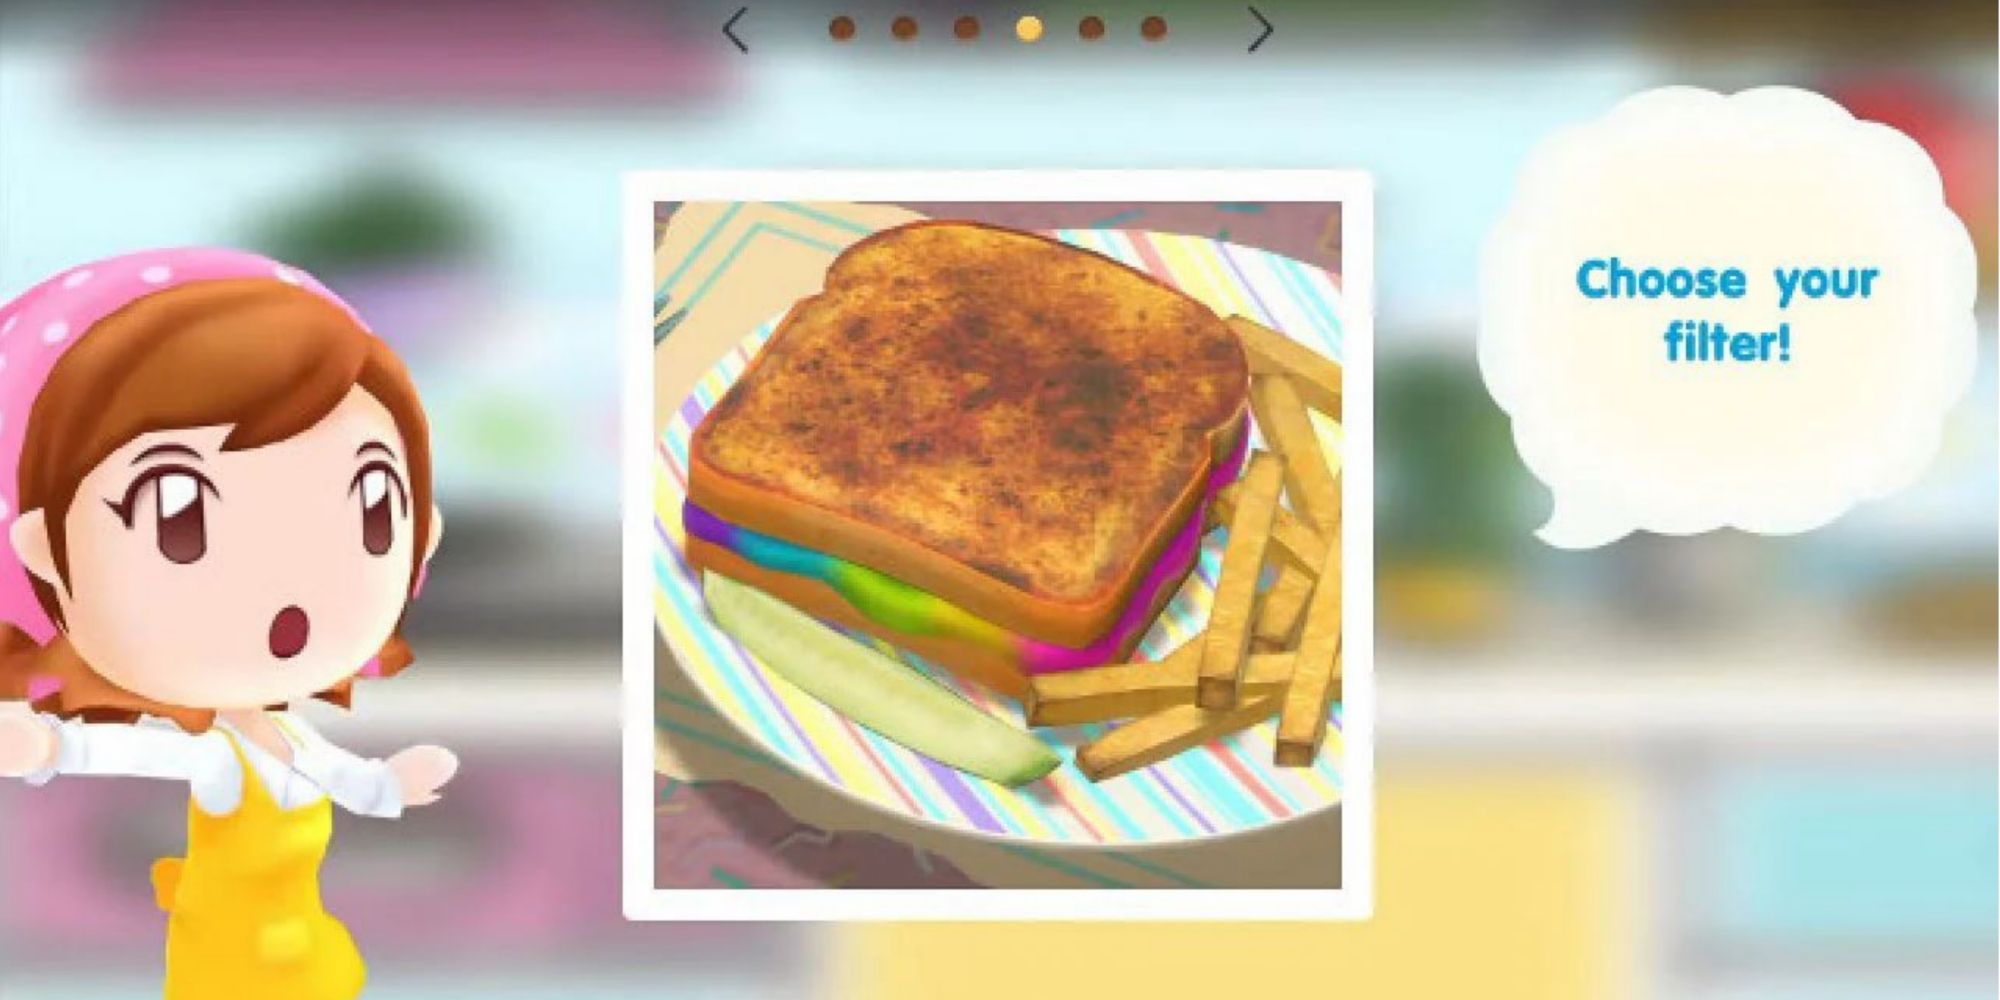 Mama presents a rainbow grilled cheese on a plate and asks what photo filter you want